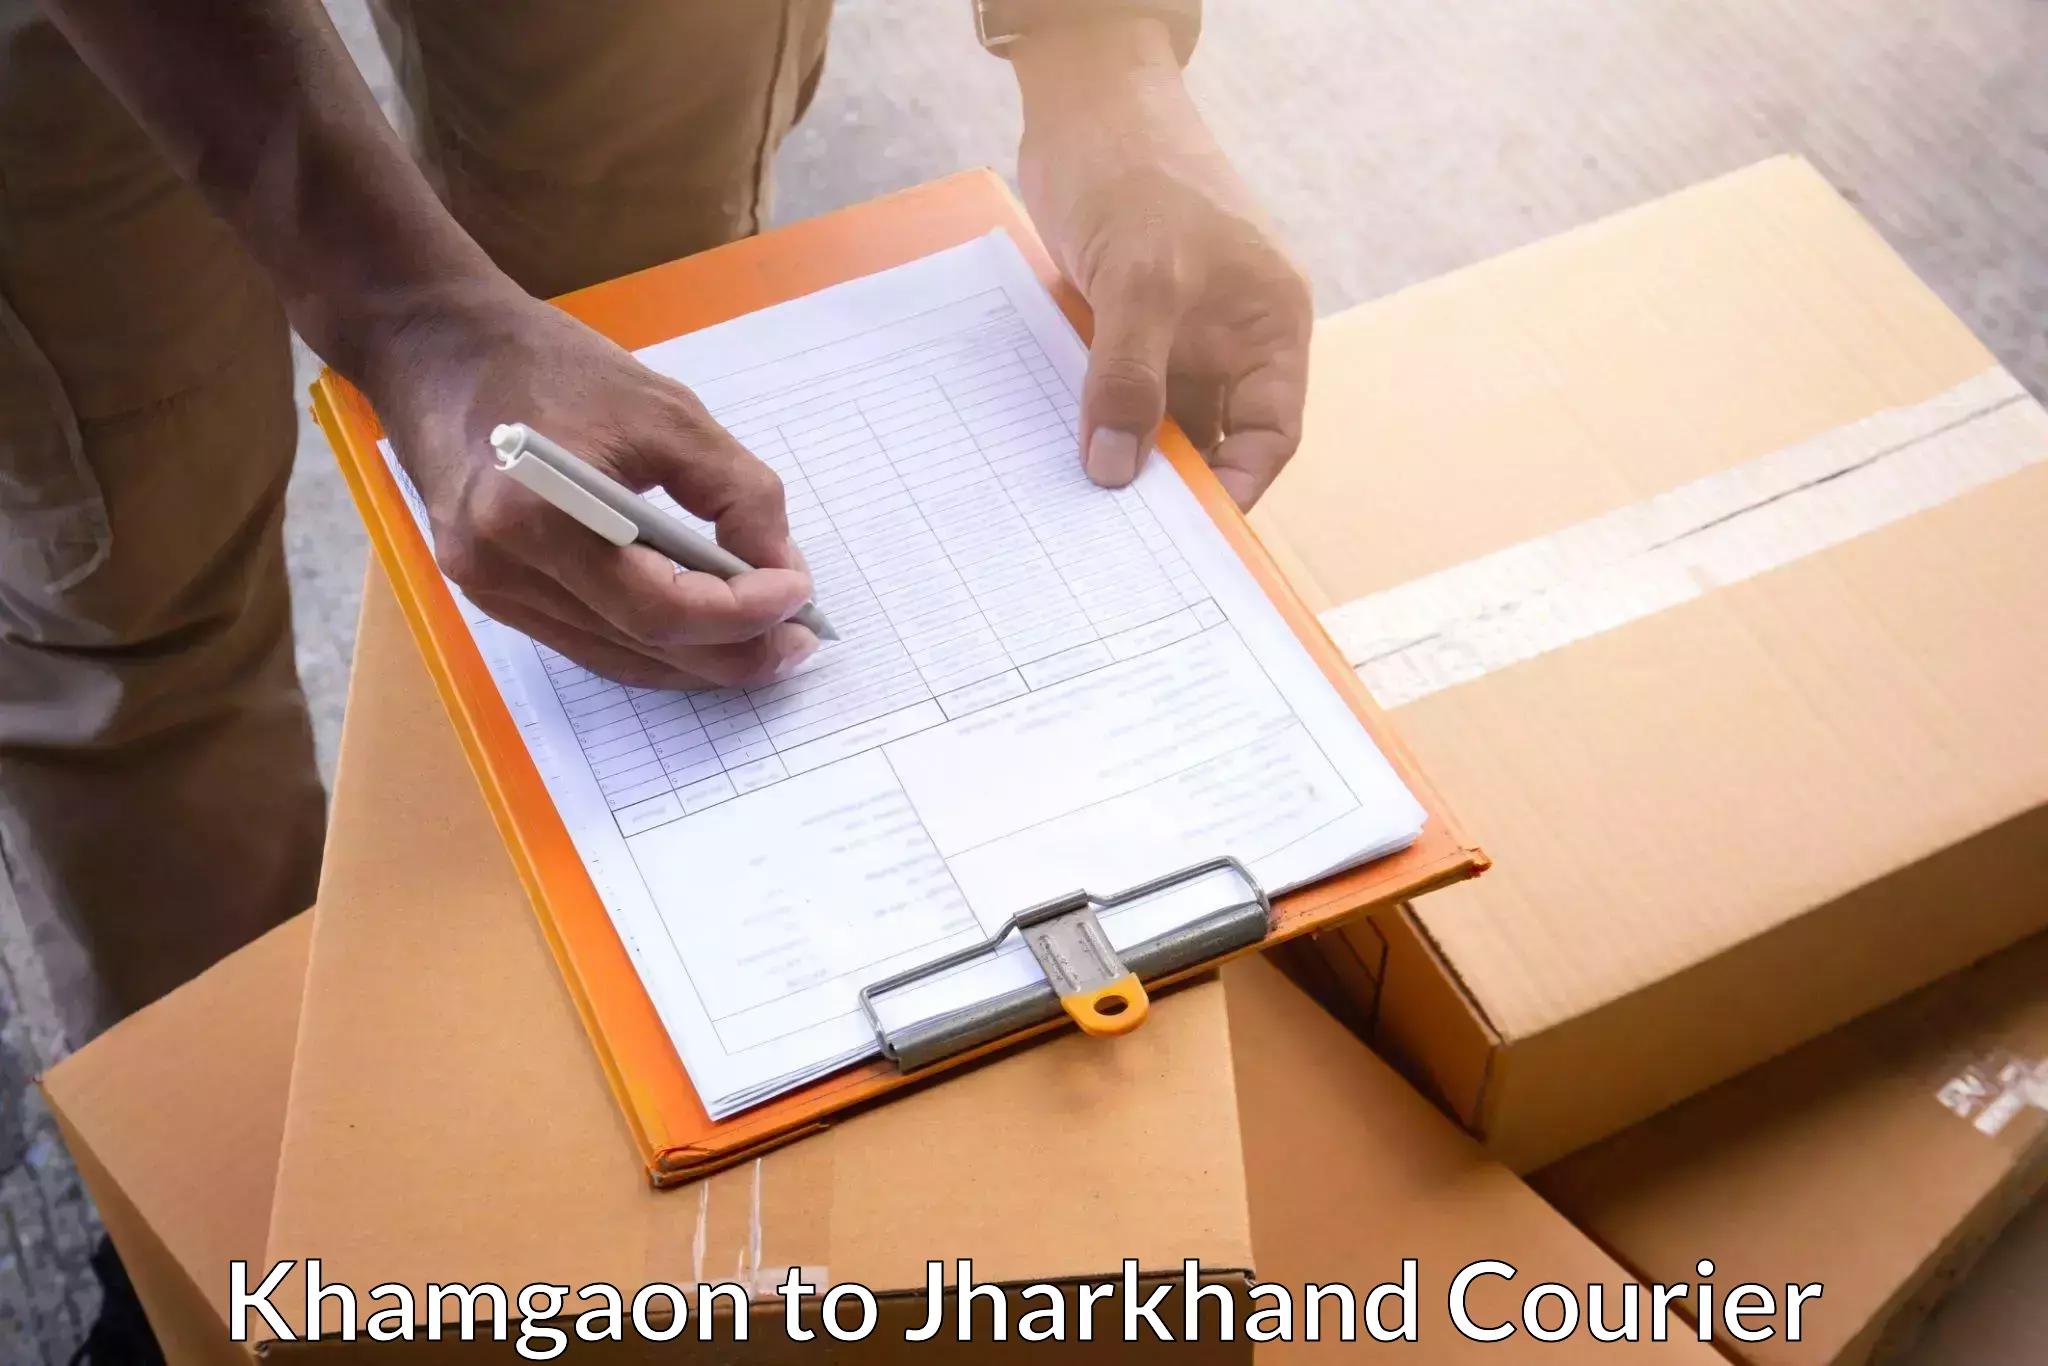 Courier service efficiency Khamgaon to Topchanchi